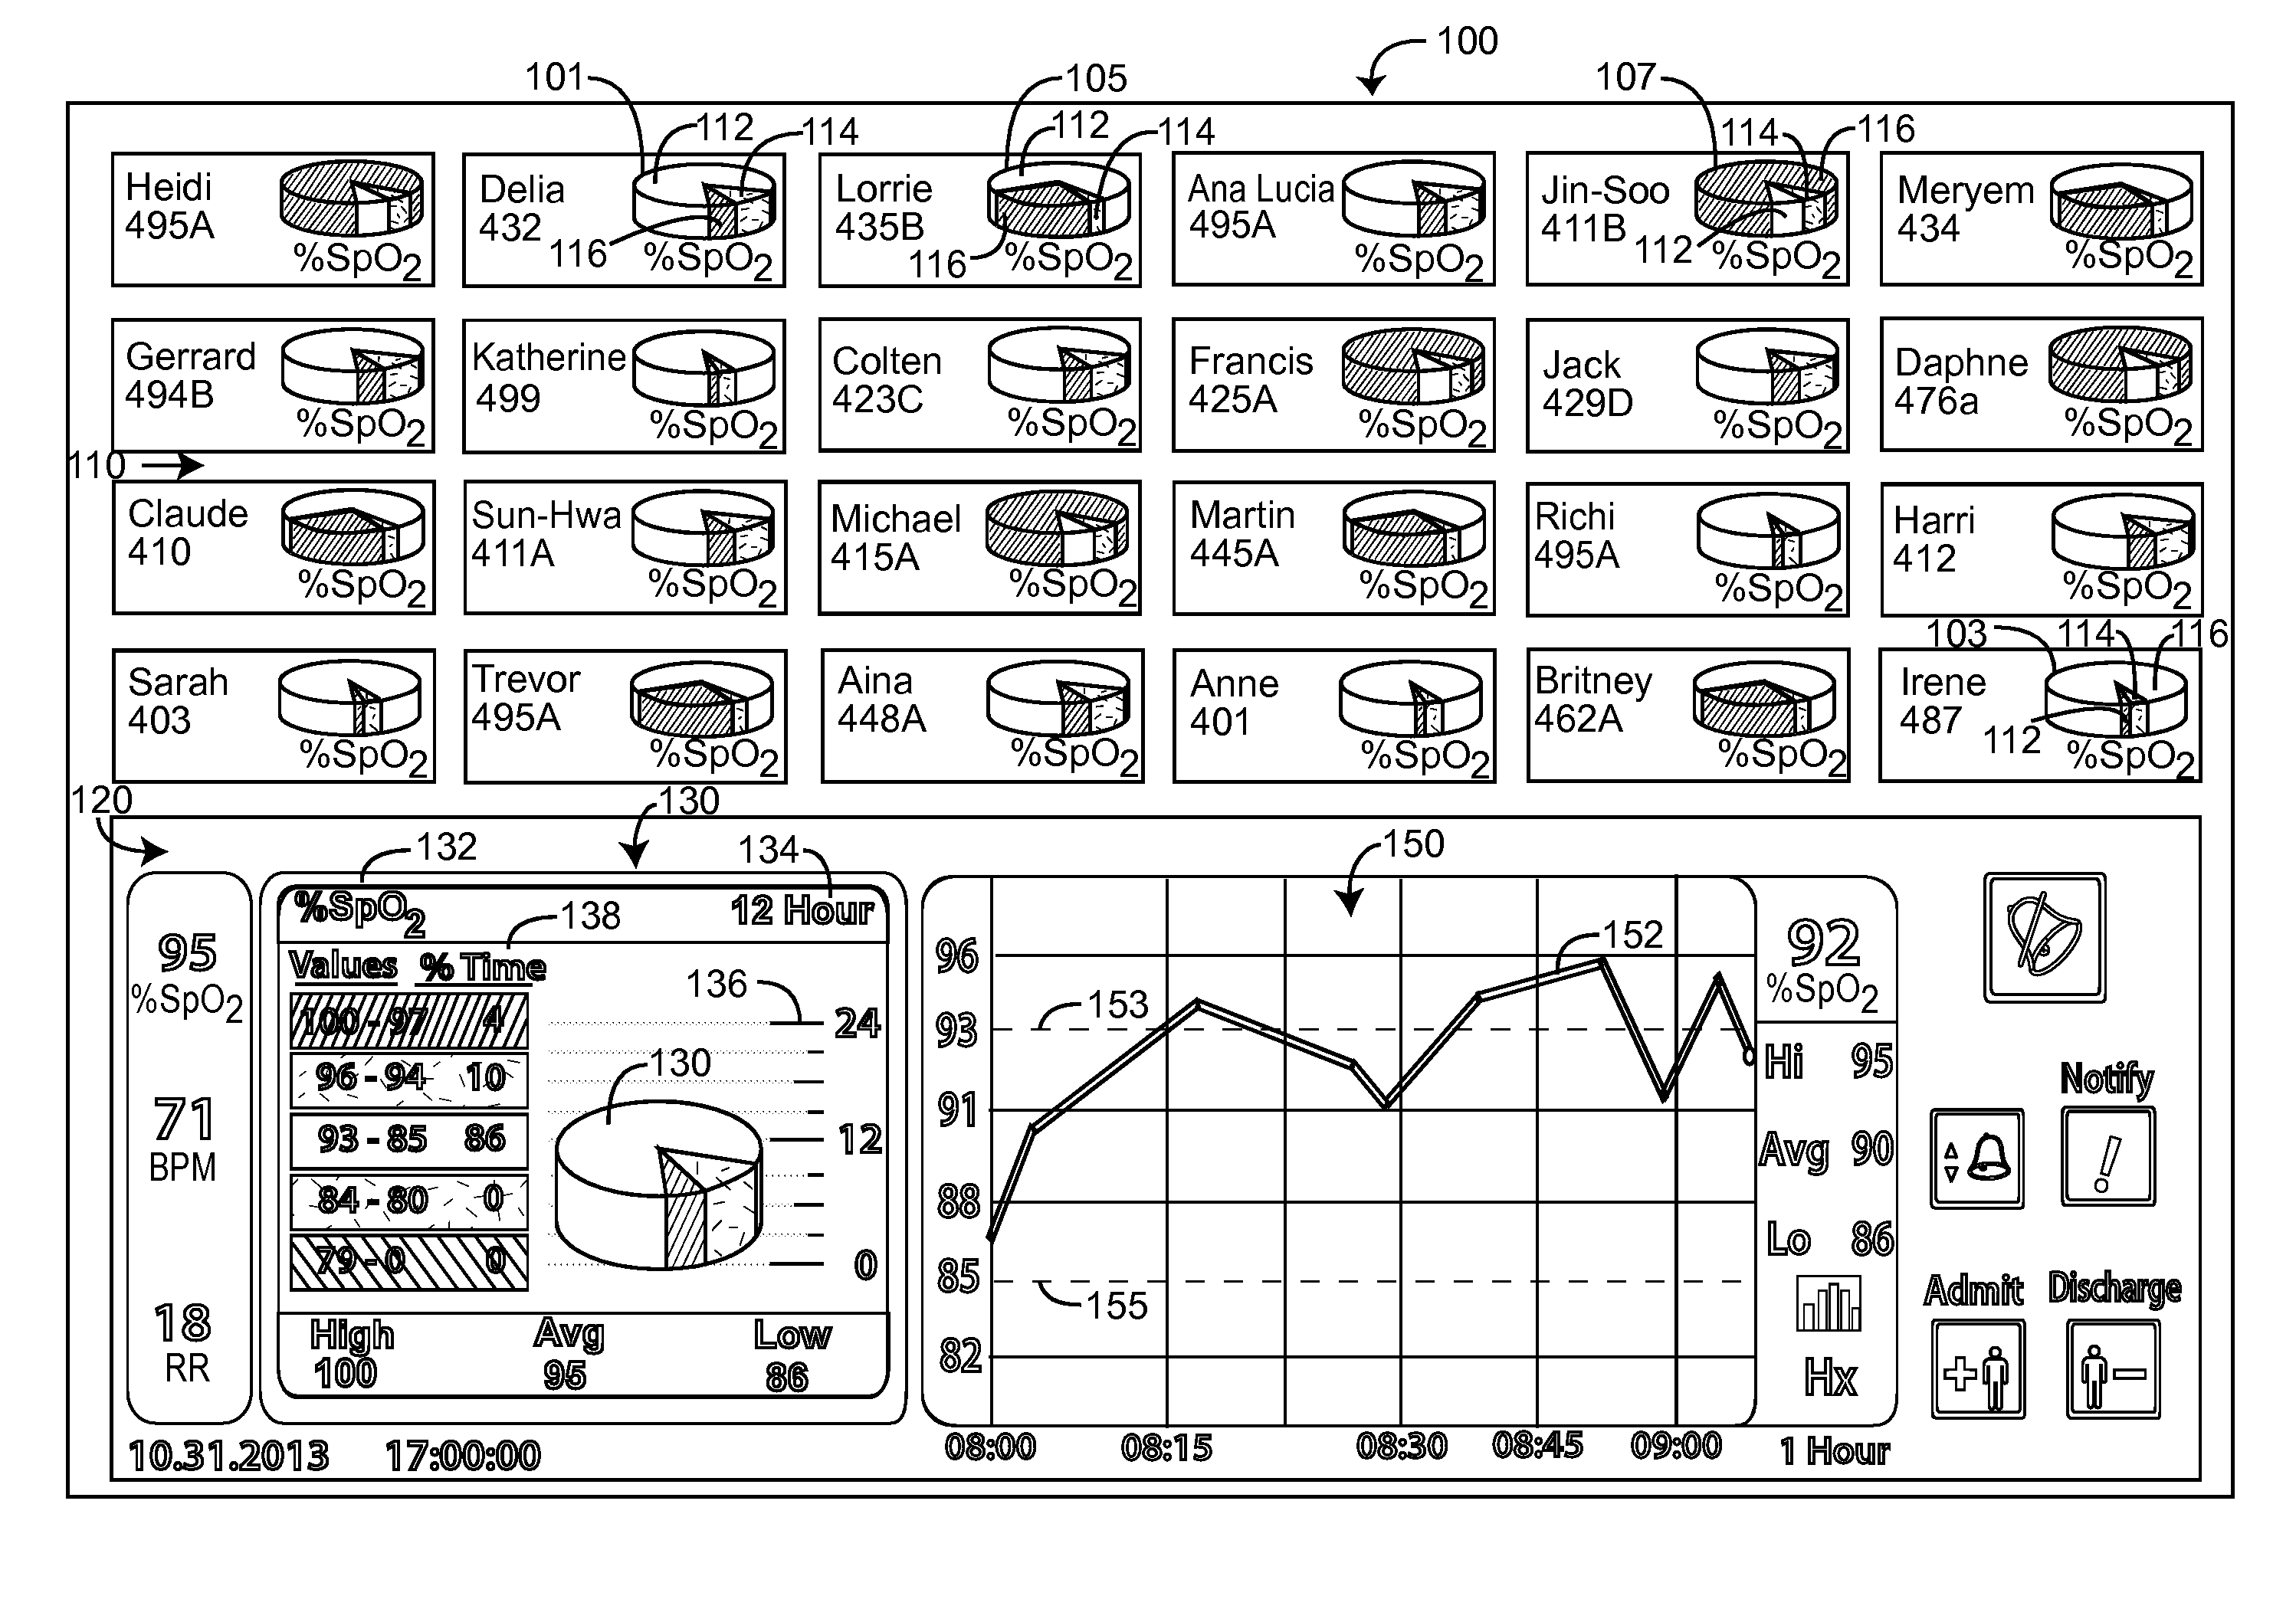 Physiological status monitor